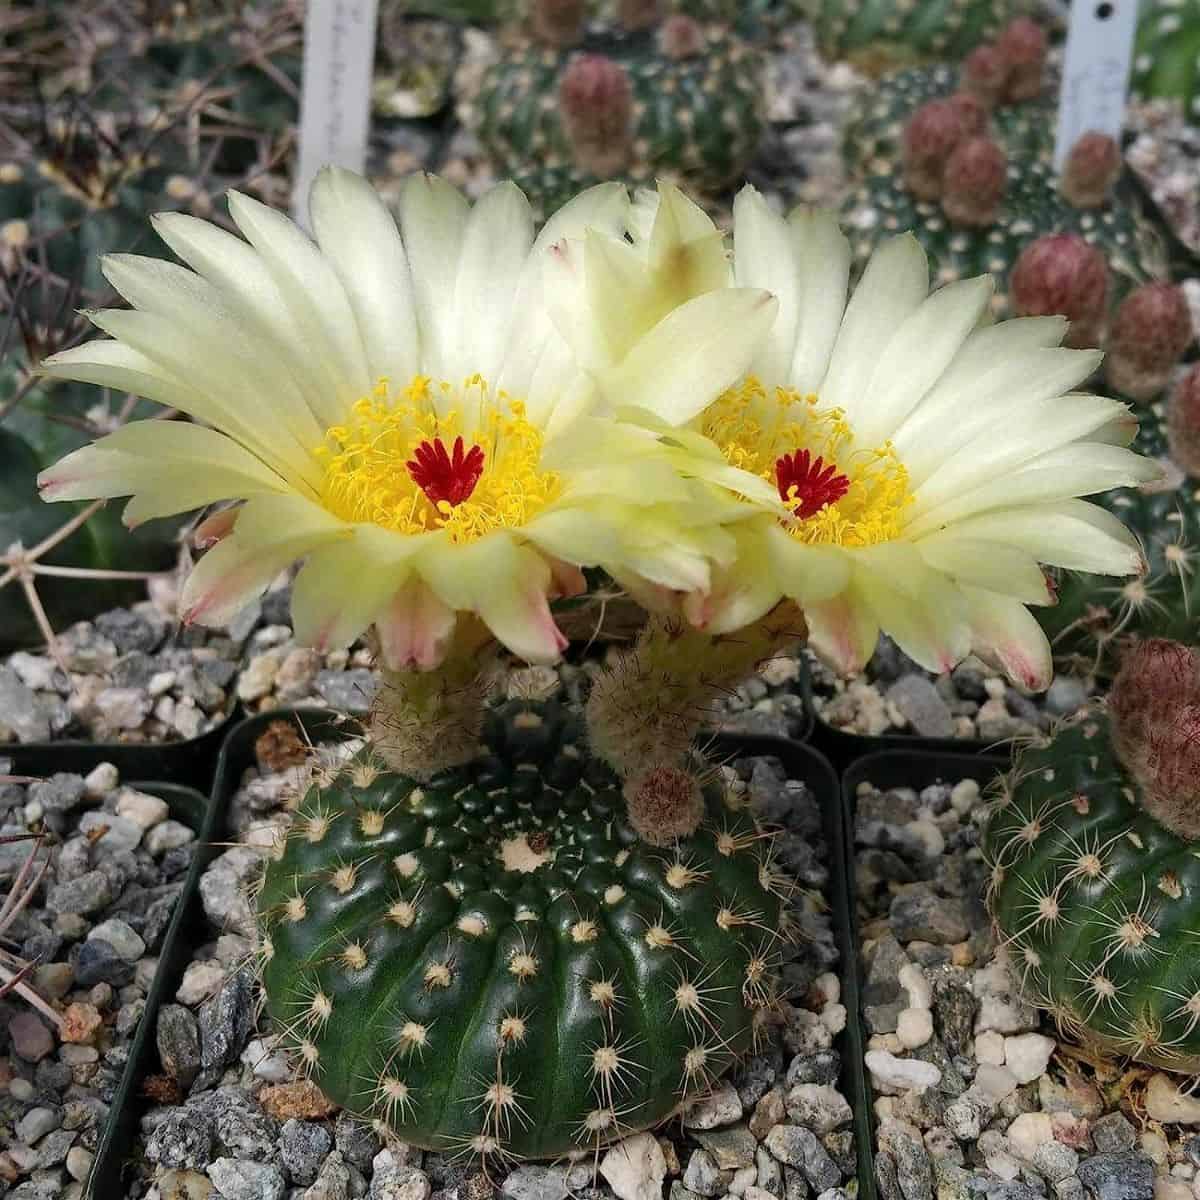 Notocactus Concinnus with two yellow flowers grows in a pot.